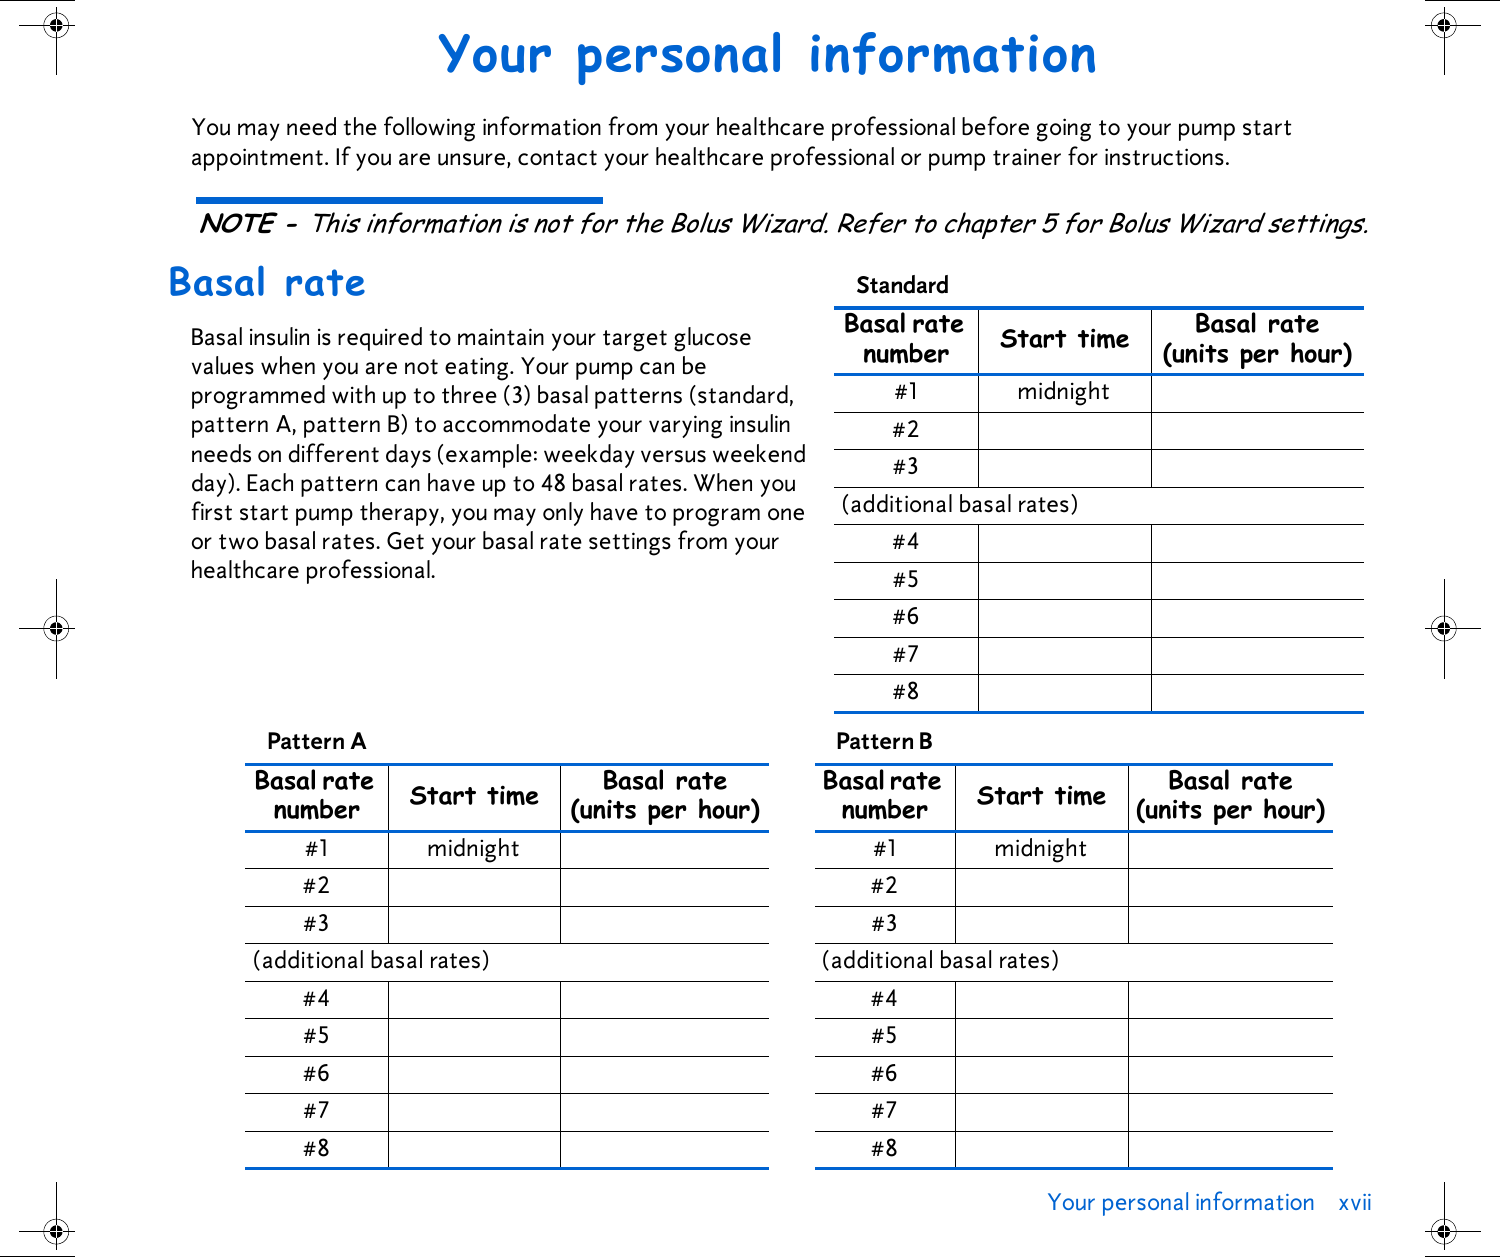 Your personal information xvii Your personal informationYou may need the following information from your healthcare professional before going to your pump start appointment. If you are unsure, contact your healthcare professional or pump trainer for instructions.NOTE - This information is not for the Bolus Wizard. Refer to chapter 5 for Bolus Wizard settings.Basal rateBasal insulin is required to maintain your target glucose values when you are not eating. Your pump can be programmed with up to three (3) basal patterns (standard, pattern A, pattern B) to accommodate your varying insulin needs on different days (example: weekday versus weekend day). Each pattern can have up to 48 basal rates. When you first start pump therapy, you may only have to program one or two basal rates. Get your basal rate settings from your healthcare professional.Standard Basal rate number Start time Basal rate(units per hour)#1 midnight#2#3(additional basal rates)#4#5#6#7#8Pattern A Basal rate number Start time Basal rate(units per hour)#1 midnight#2#3(additional basal rates)#4#5#6#7#8Pattern B Basal rate number Start time Basal rate(units per hour)#1 midnight#2#3(additional basal rates)#4#5#6#7#8